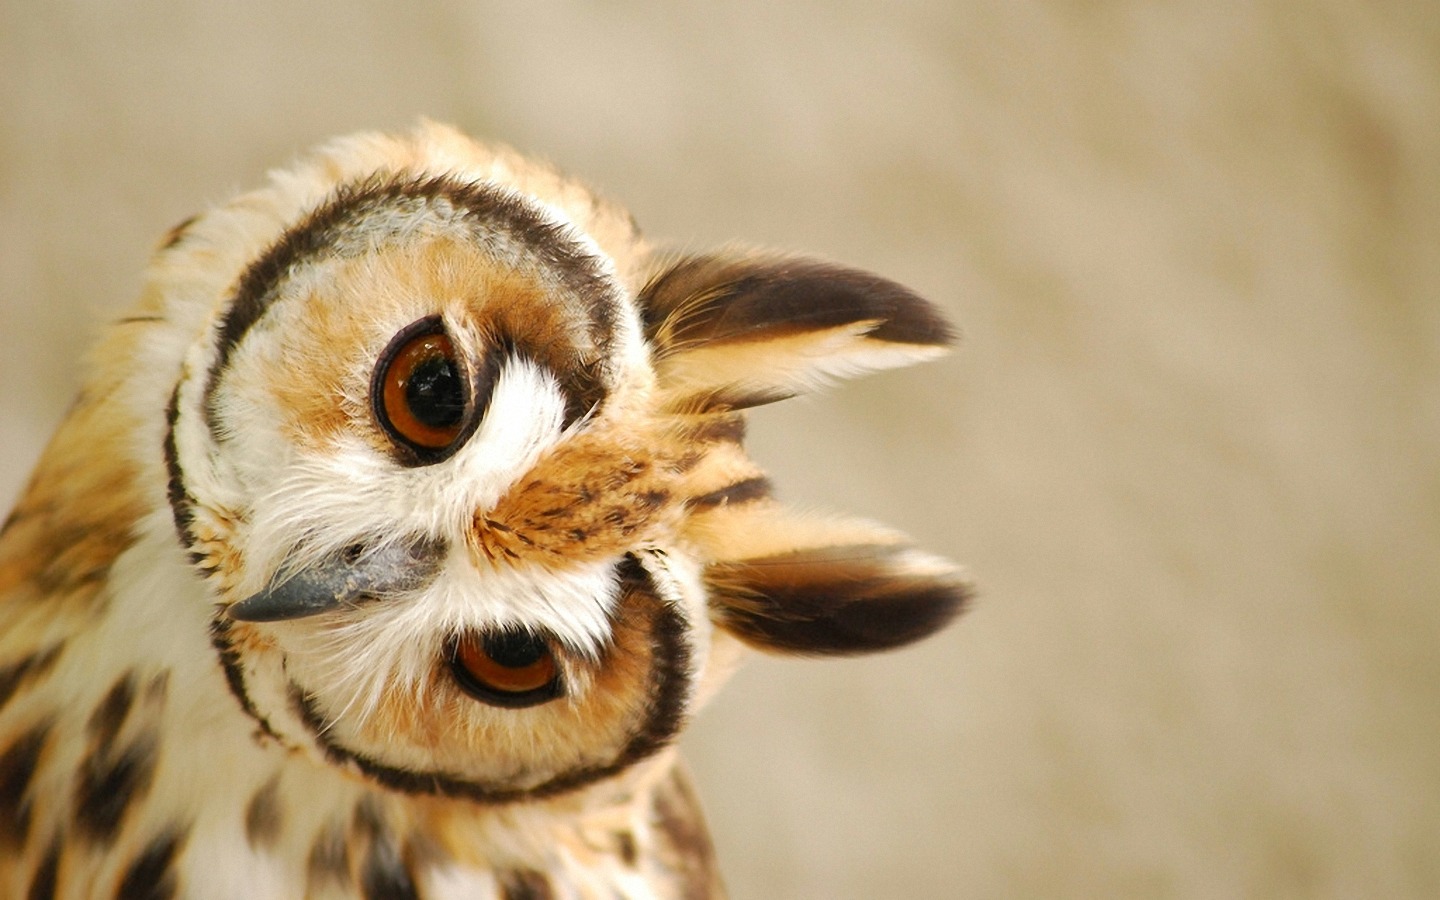 Cute Owl Wallpaper Pictures